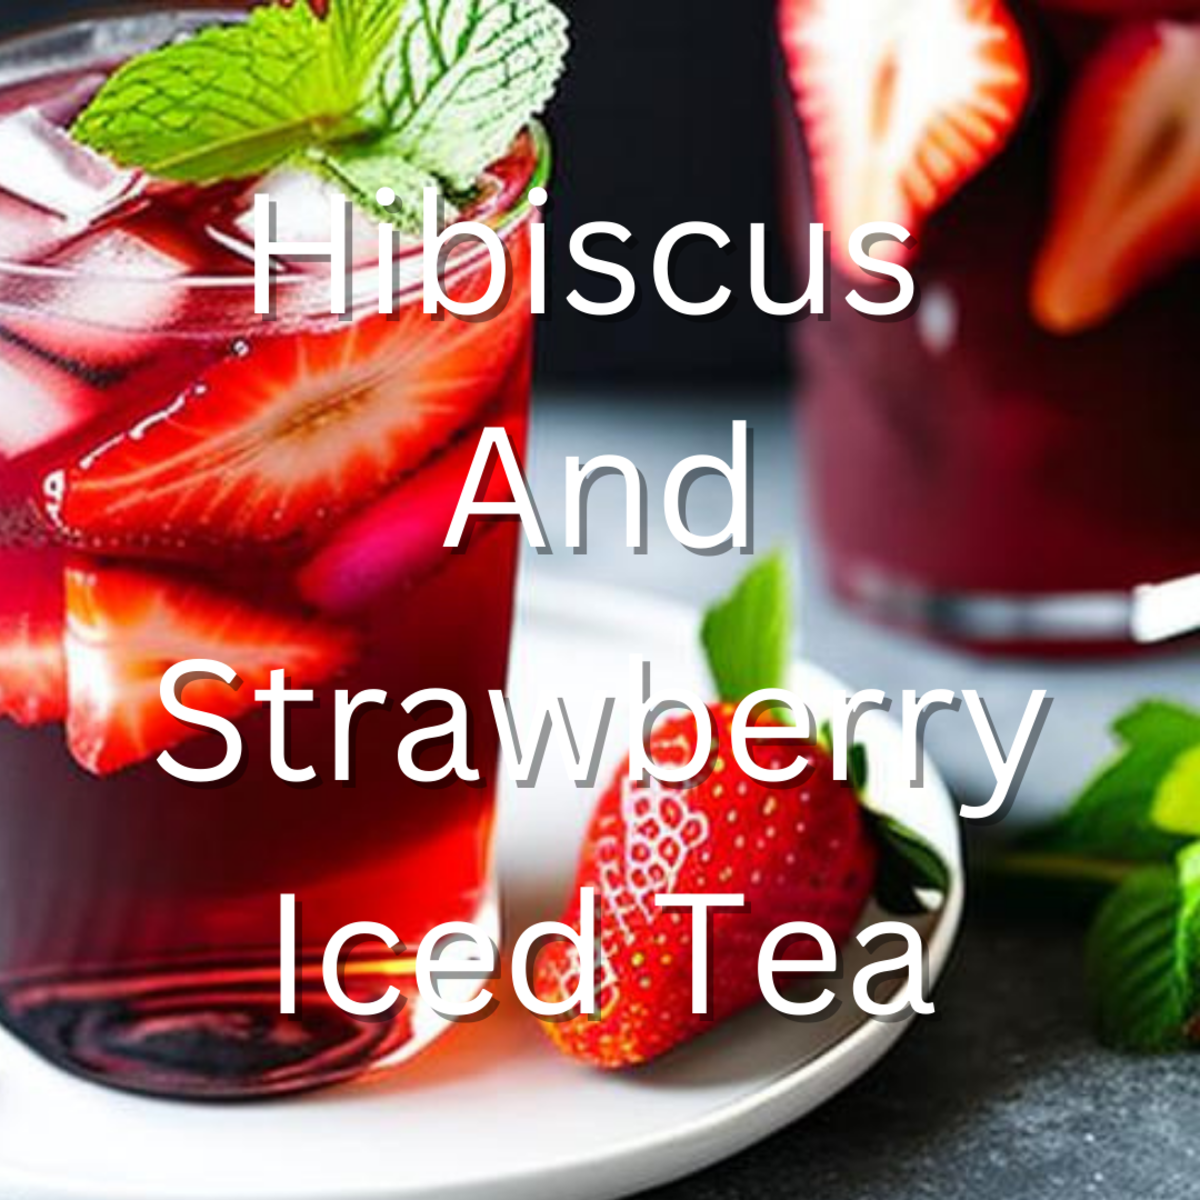 Hibiscus and Strawberry Iced Tea